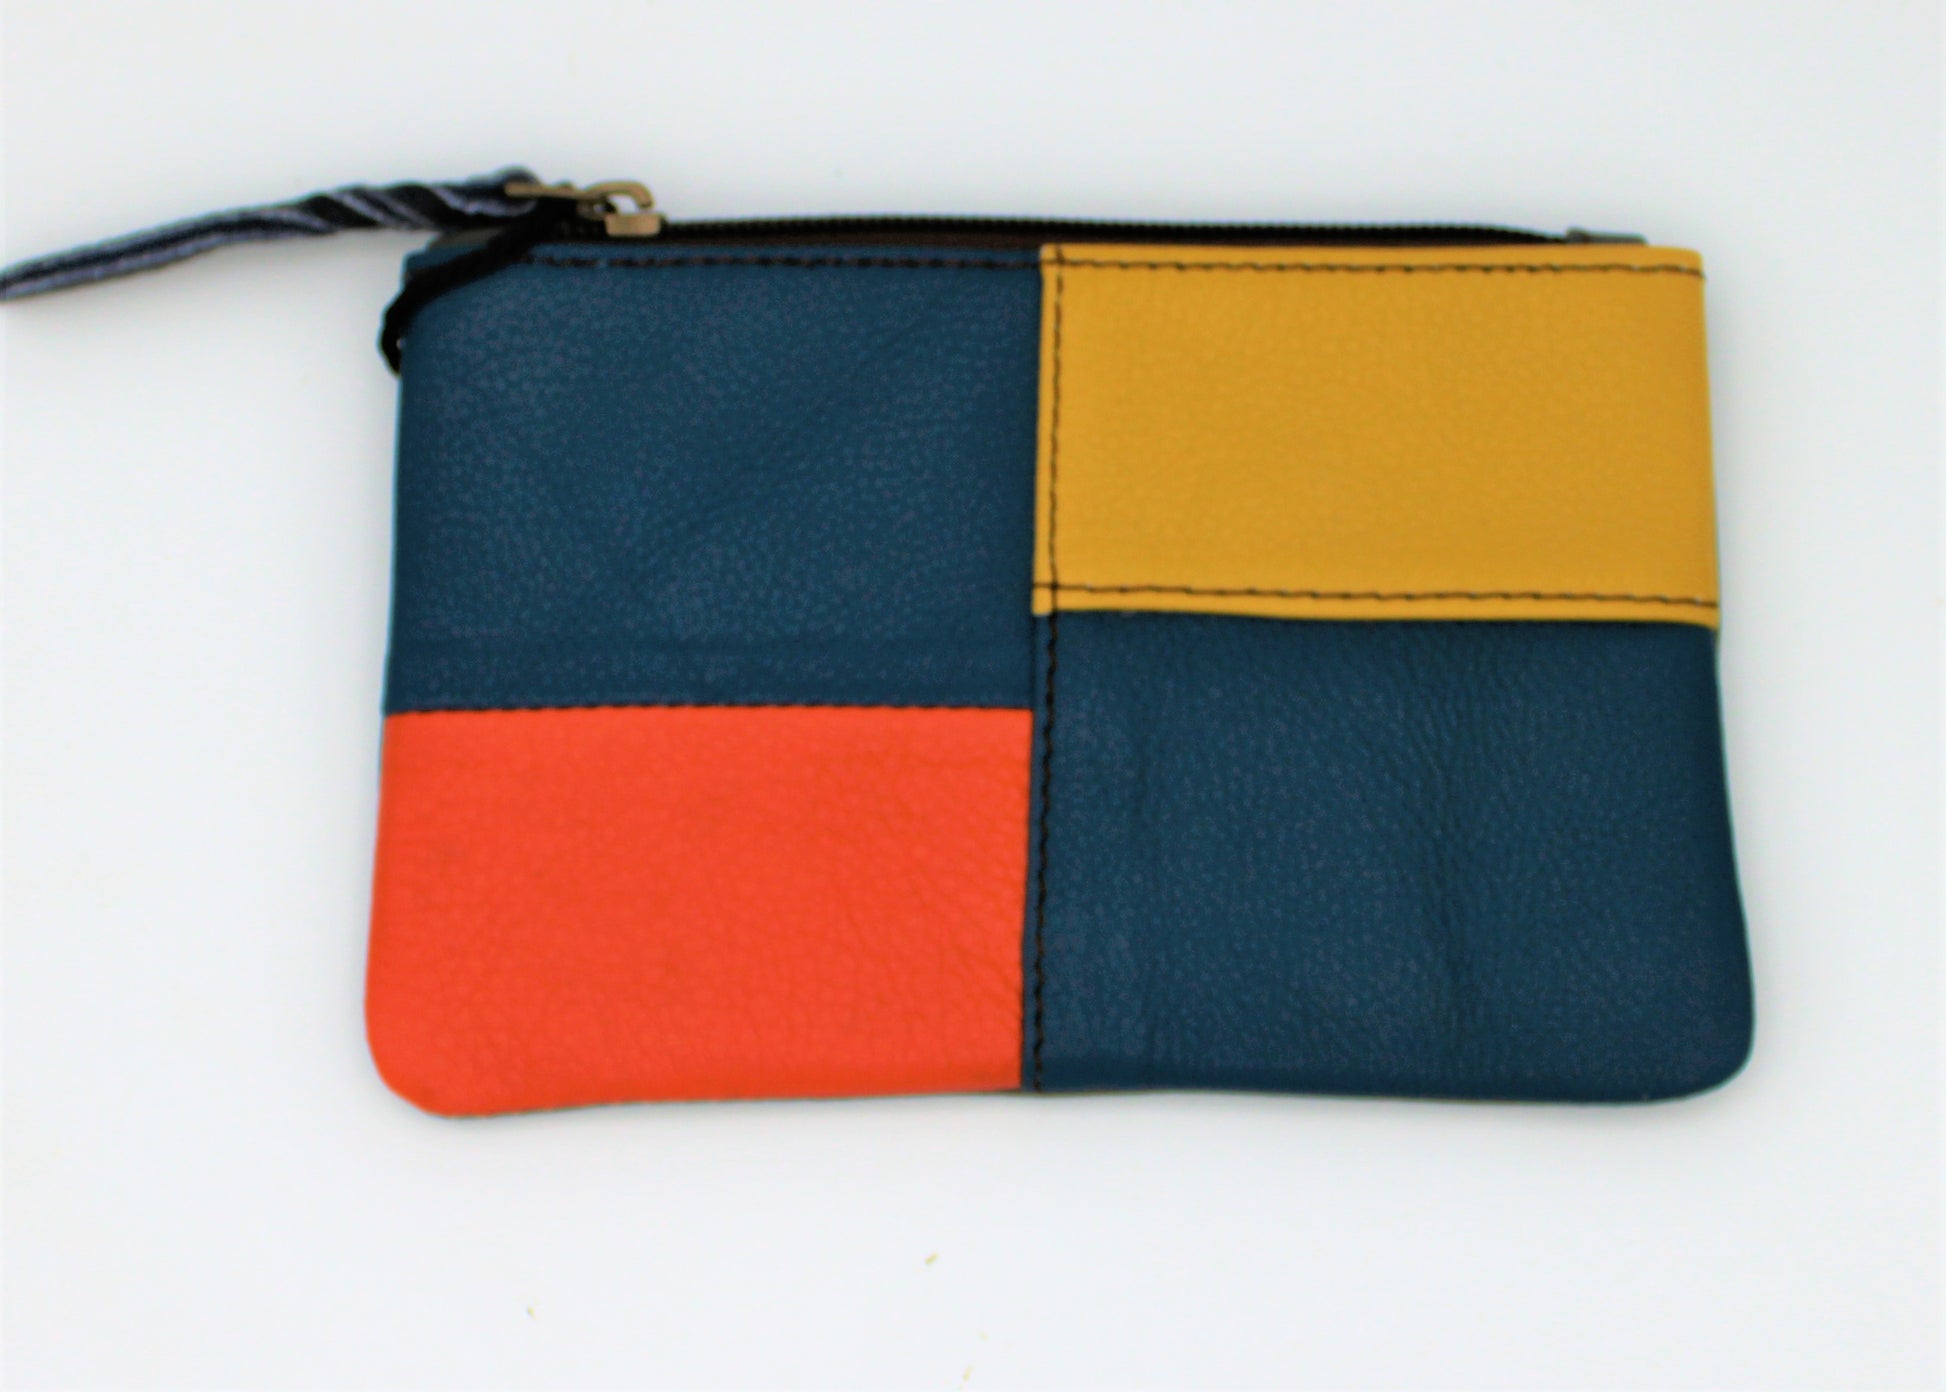 Zahra Print Leather Bag in Navy, Yellow and Orange